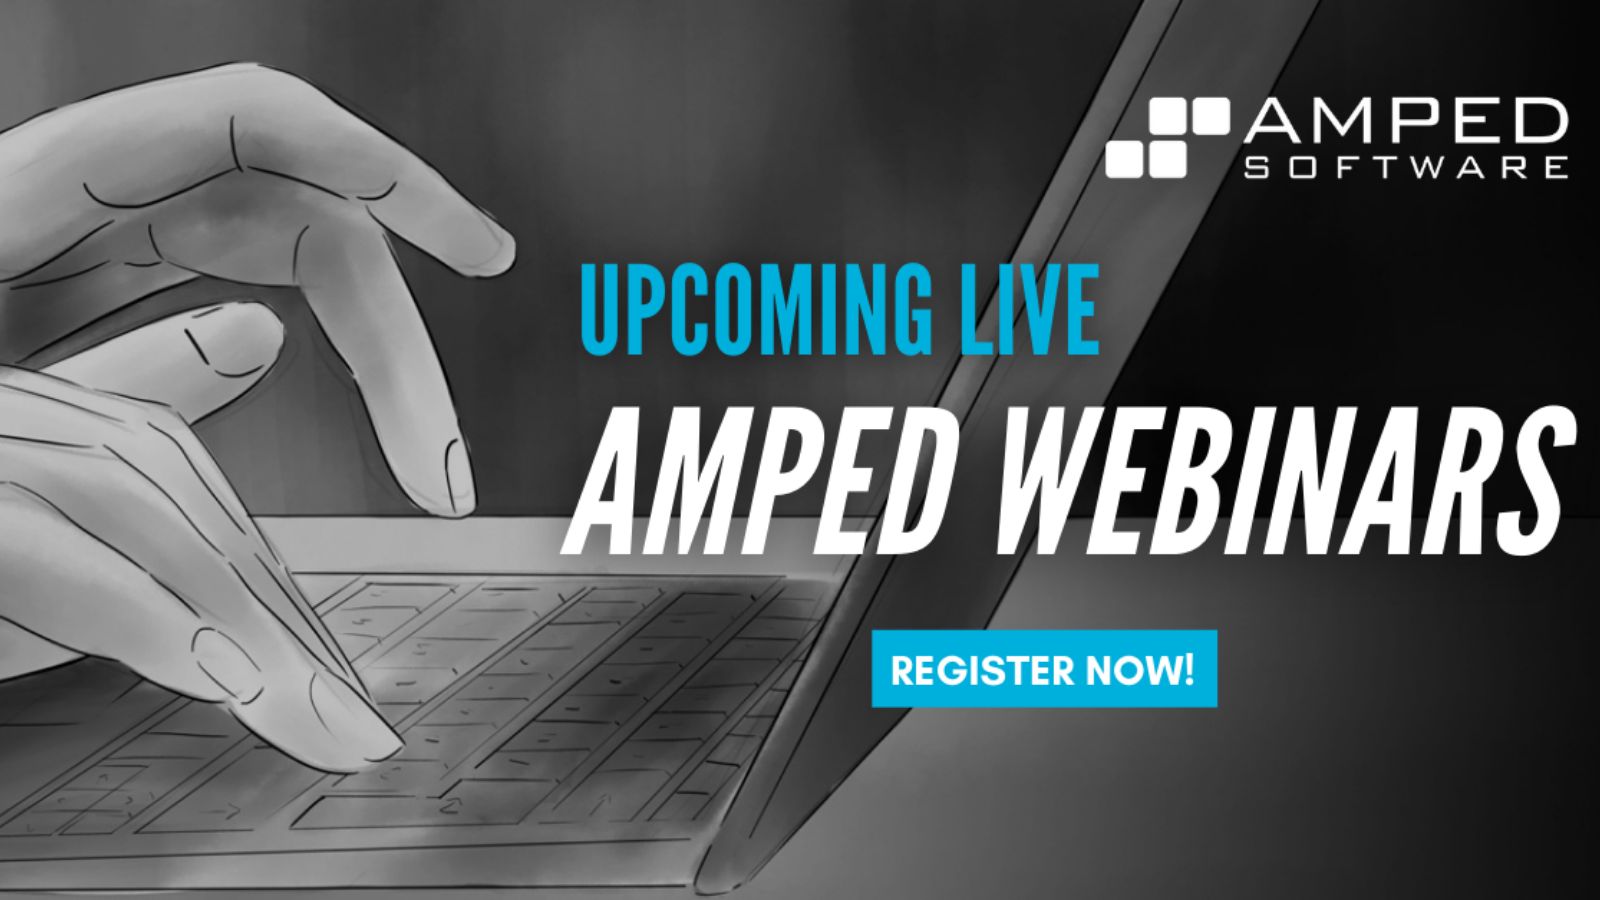 A sketch of hands typing on a laptop keyboard behind the words "Upcoming Live Amped Webinars"